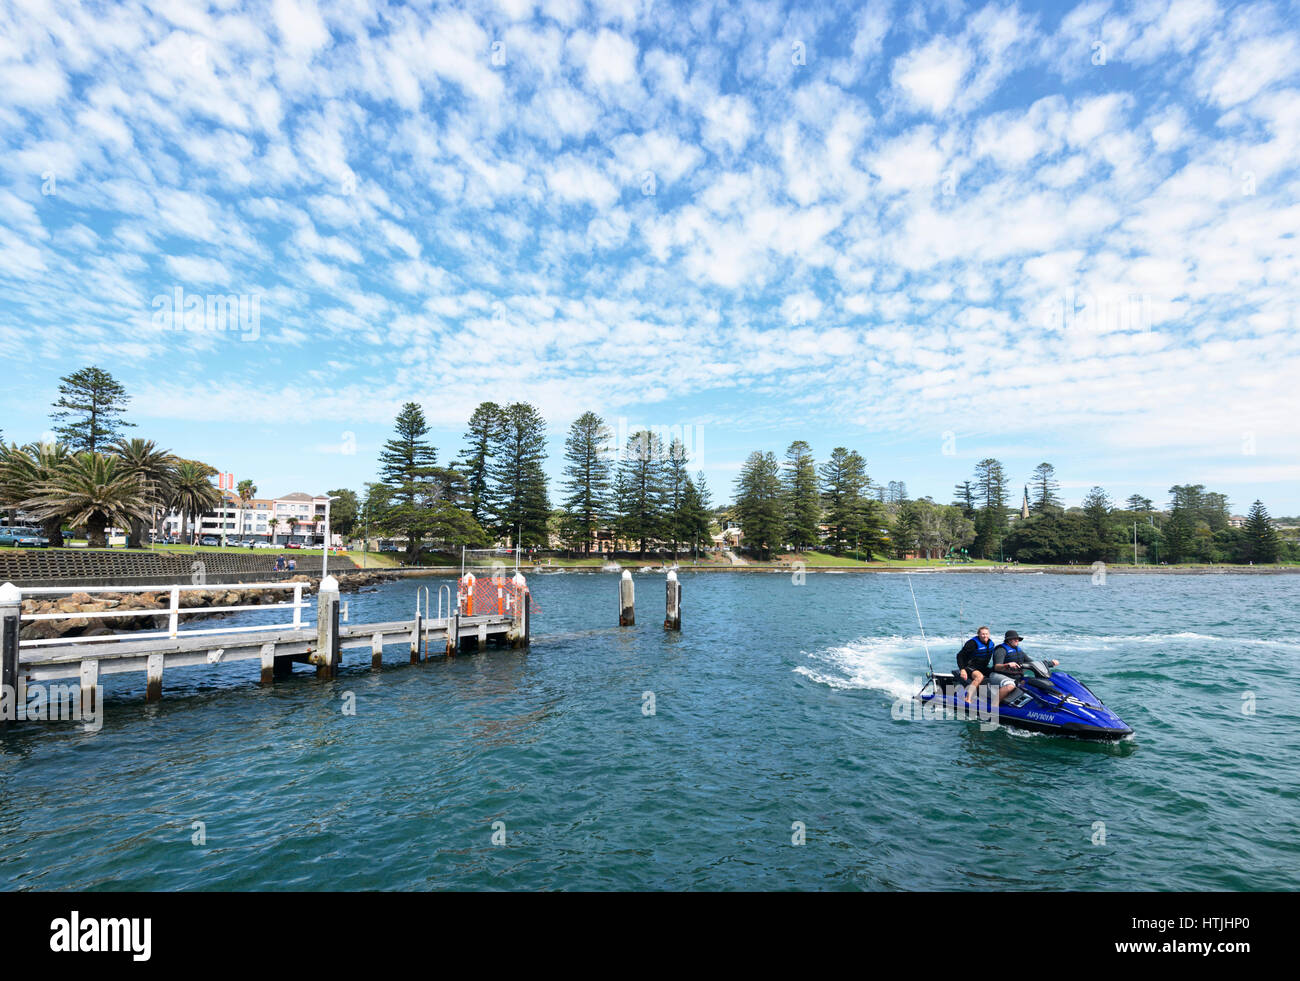 Two persons on a jetski in Kiama harbour, a scenic small coastal and touristic town on the Illawarra Coast, New South Wales, NSW, Australia Stock Photo